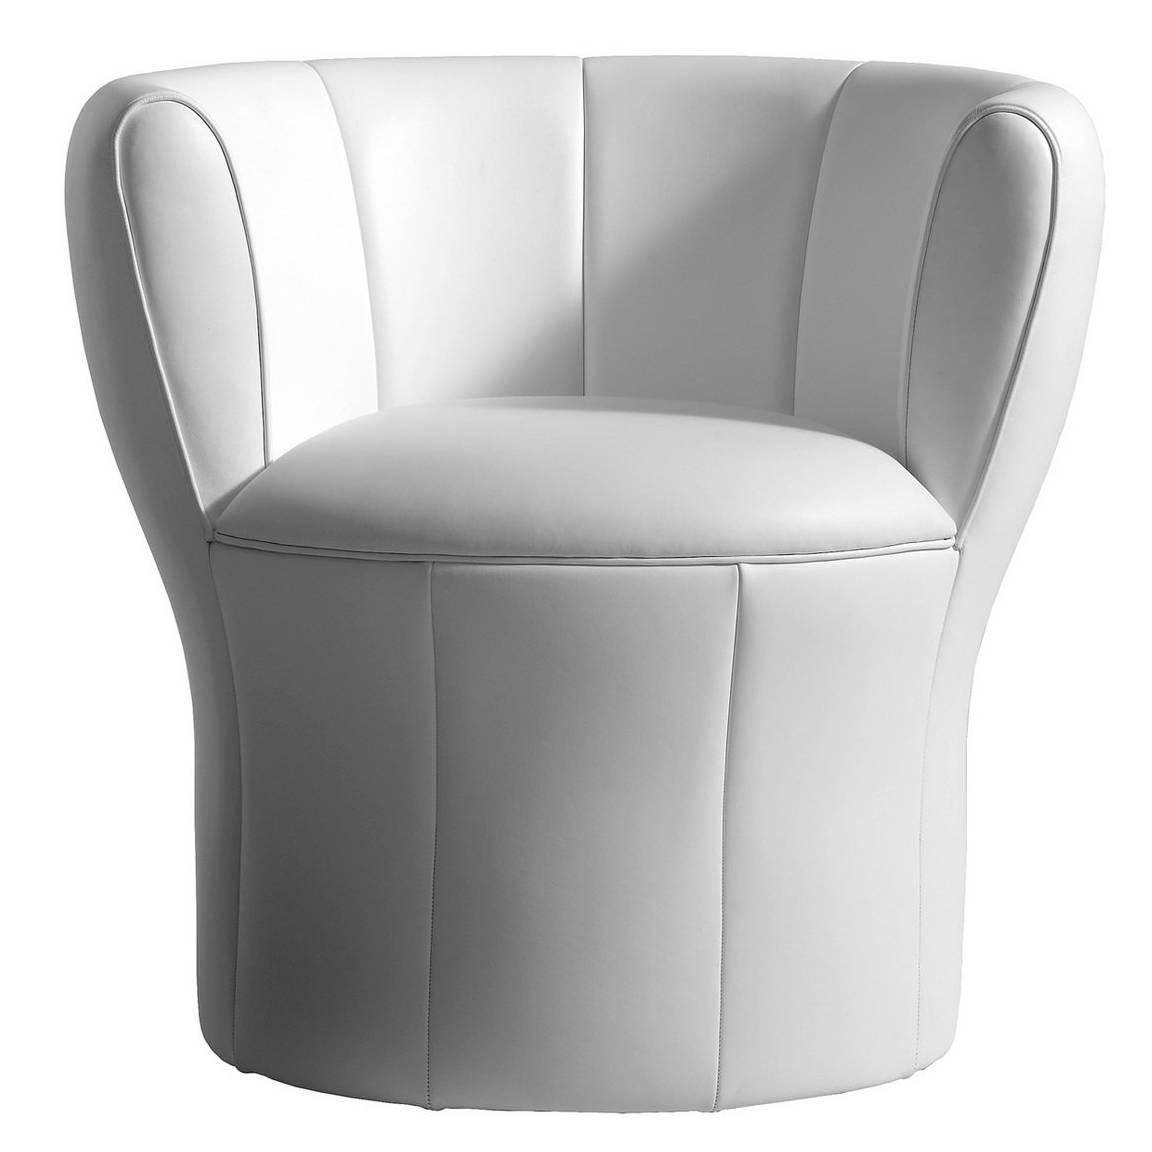 "Lisa" Leather or Fabric Fiberglass Armchair by Laudani & Romanelli for Driade